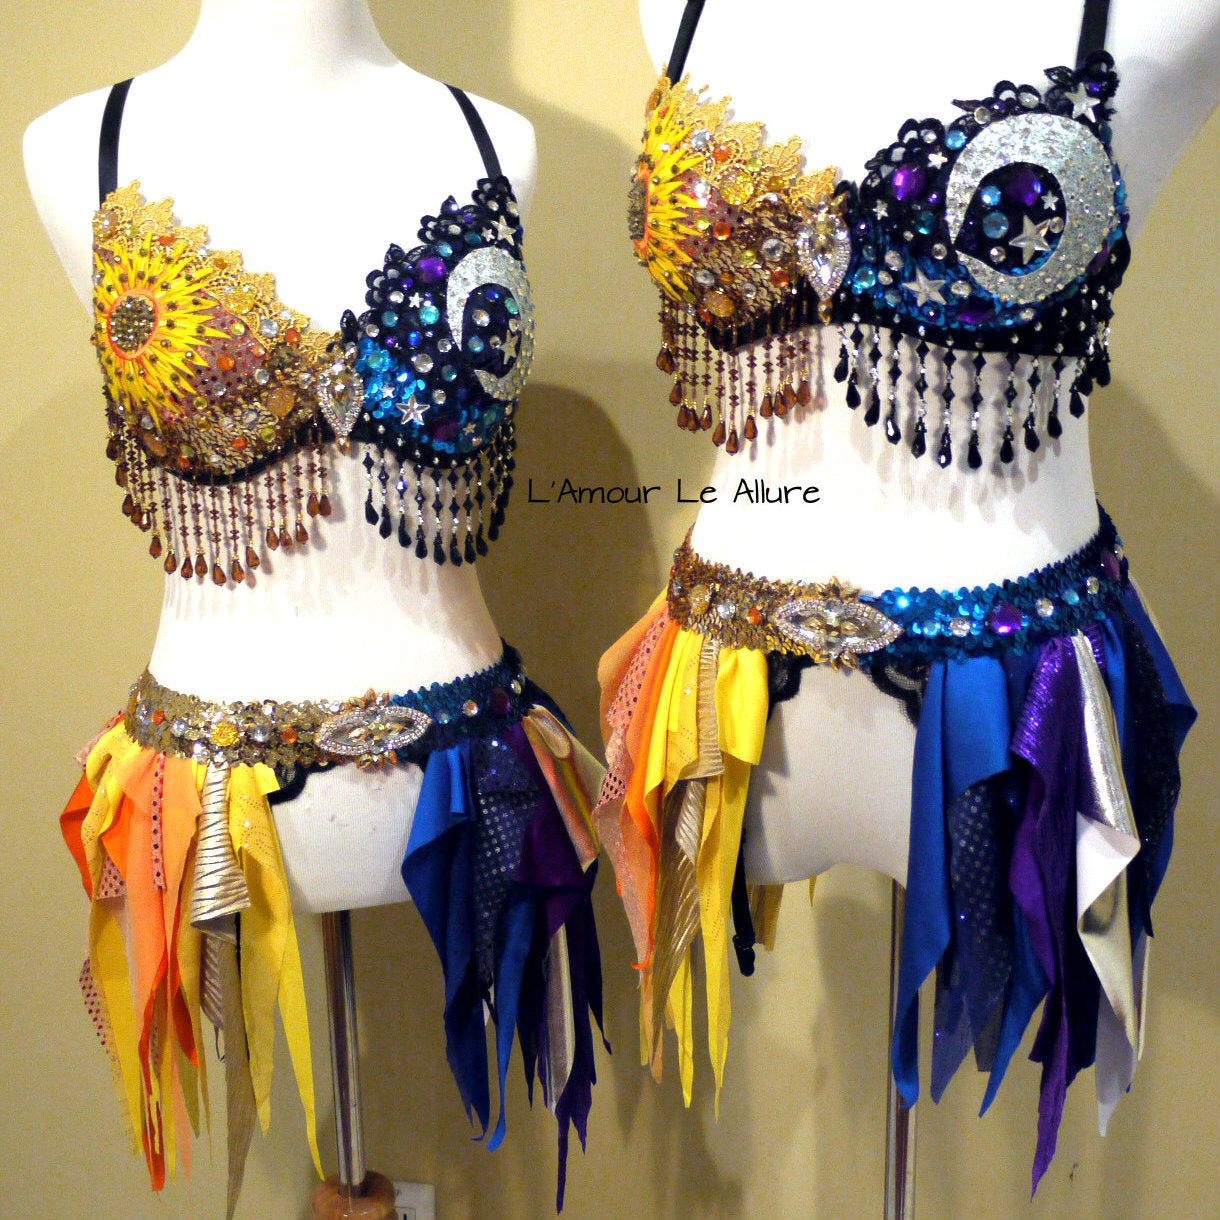 Galaxy Sun and Moon Rave Bra and Garter Belt Dance Halloween Costume –  L'Amour Le Allure